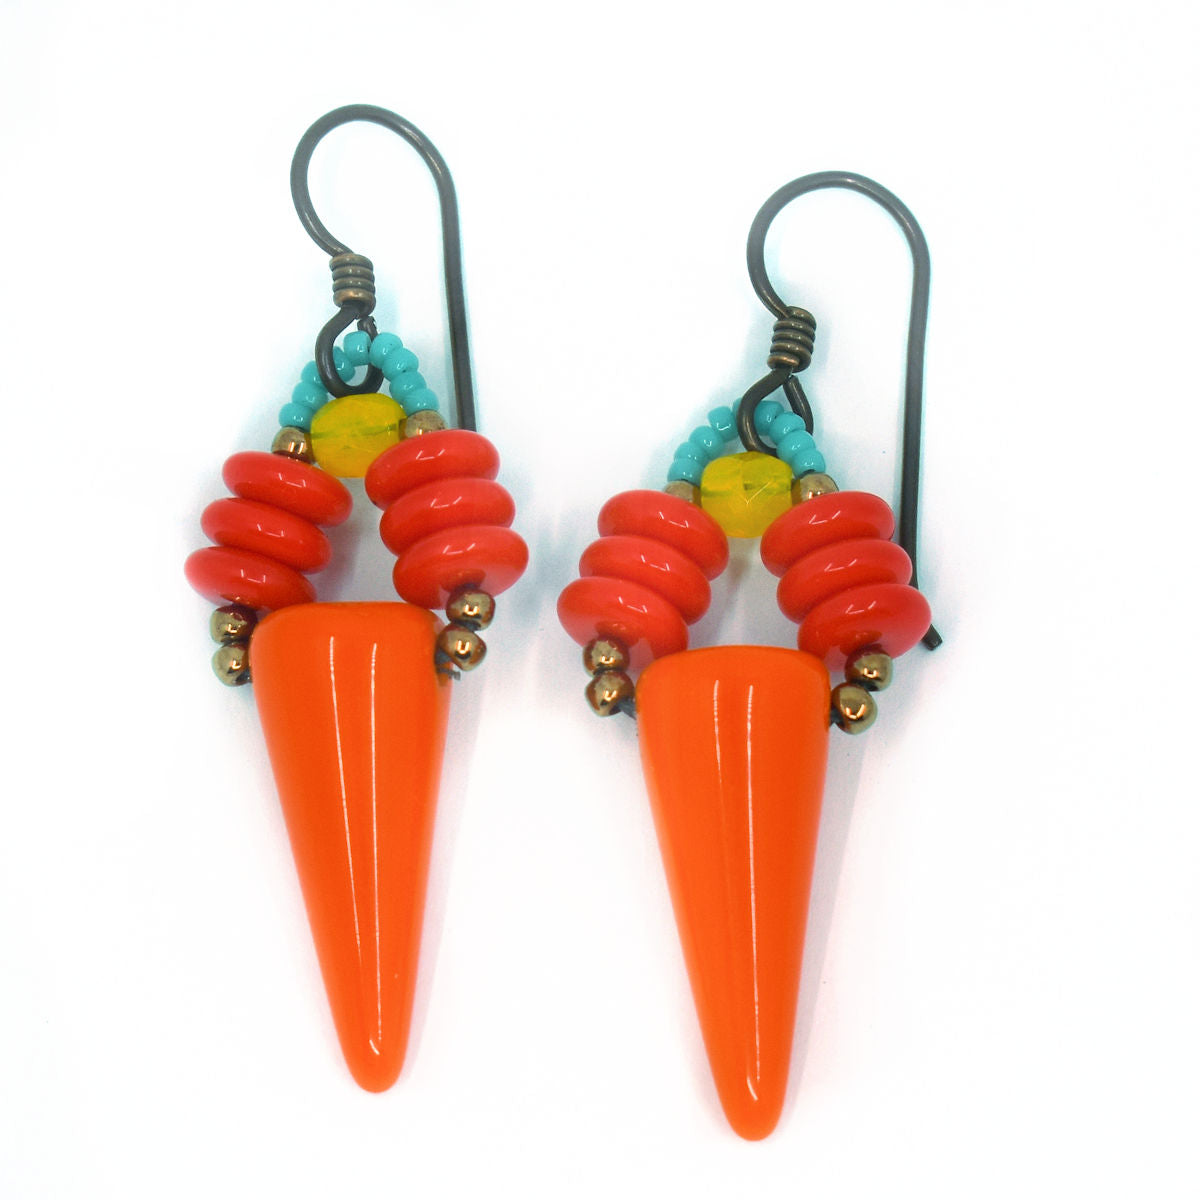 A pair of brightly colored earrings laying on a white background. The earrings have an upturned orange cone suspended from two parallel stacks of red discs and turquoise and yellow accents.